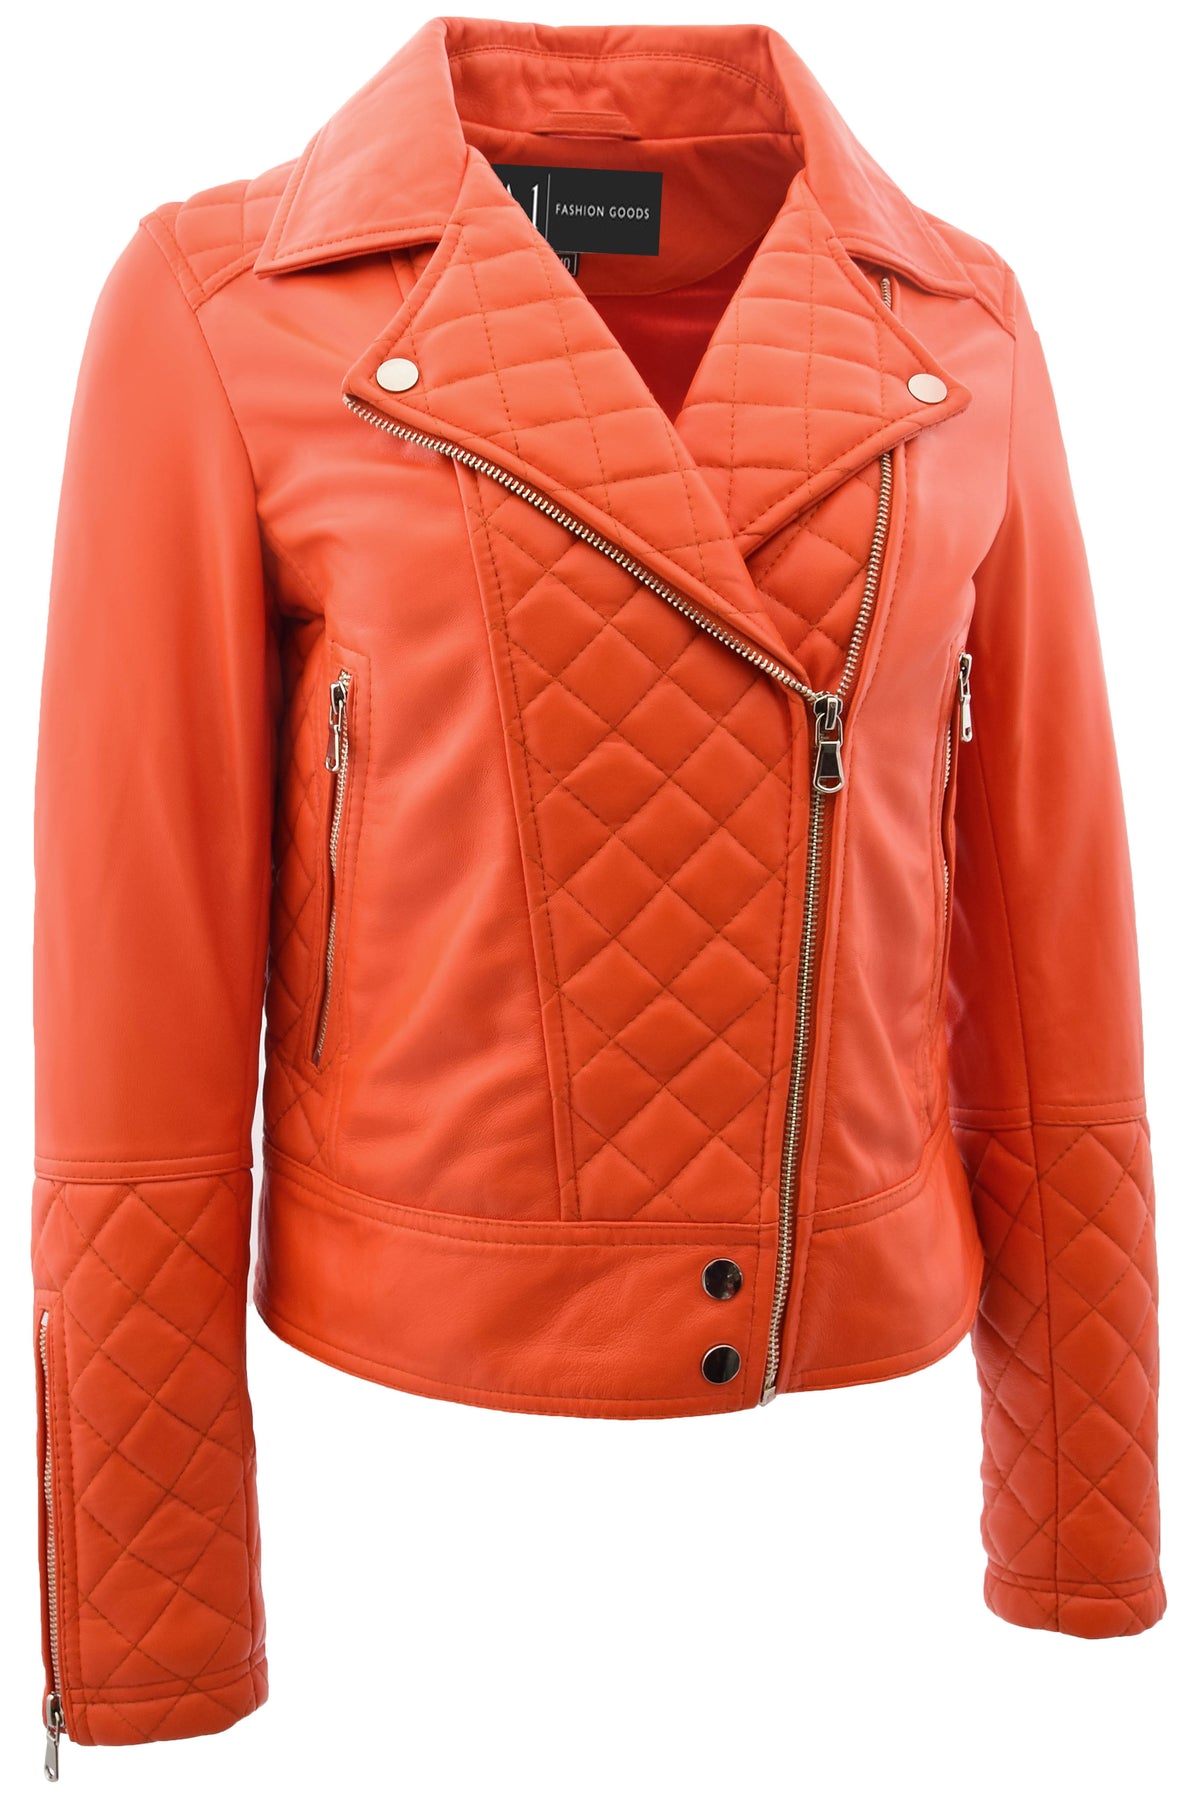 A1 FASHION GOODS Ladies Leather Bomber Jacket Trendy Fitted